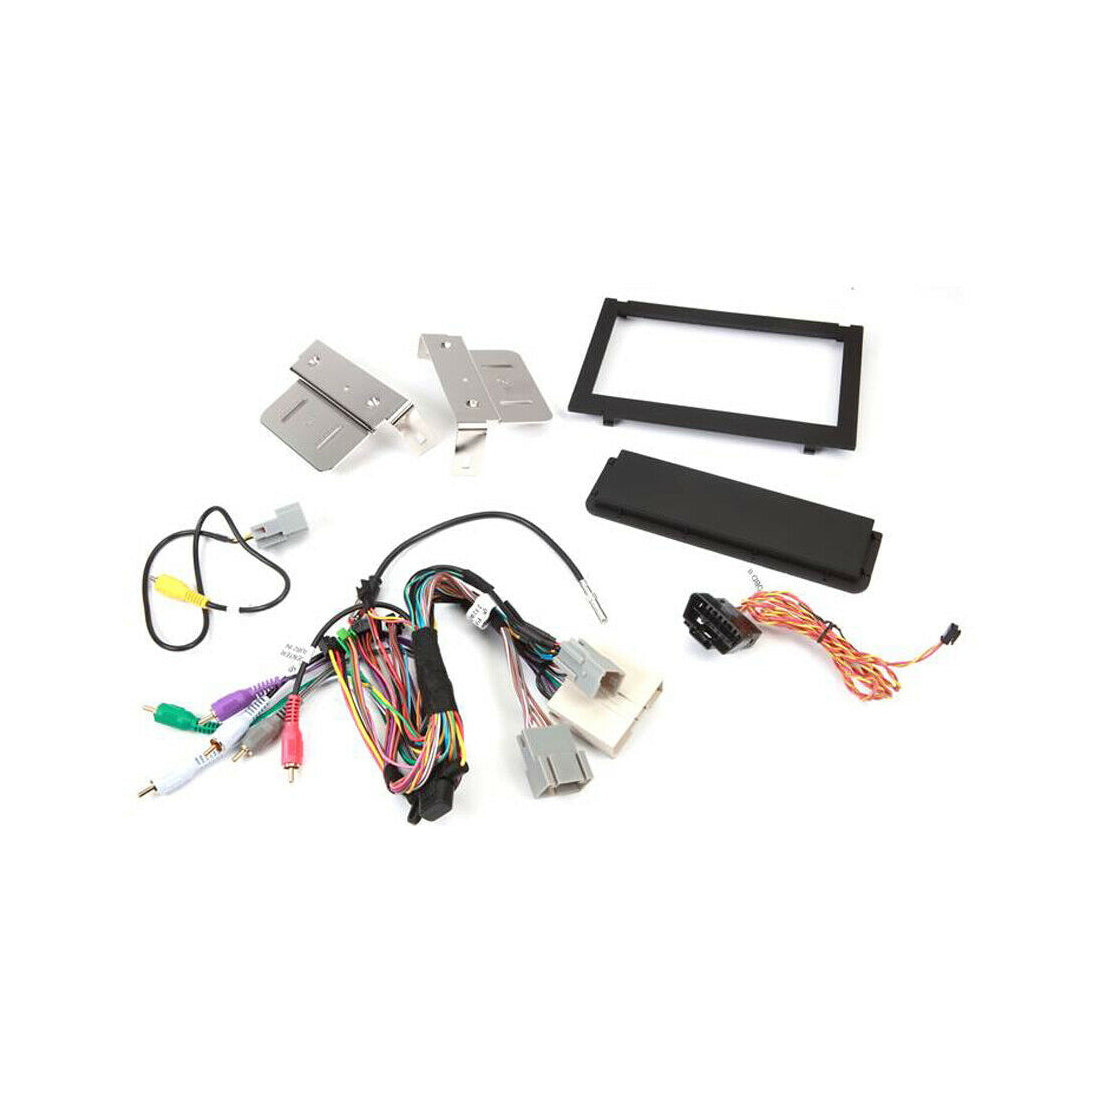 iDatalink Maestro FOR1 Installation Dash & Wiring Kit for Select Ford 2009-14